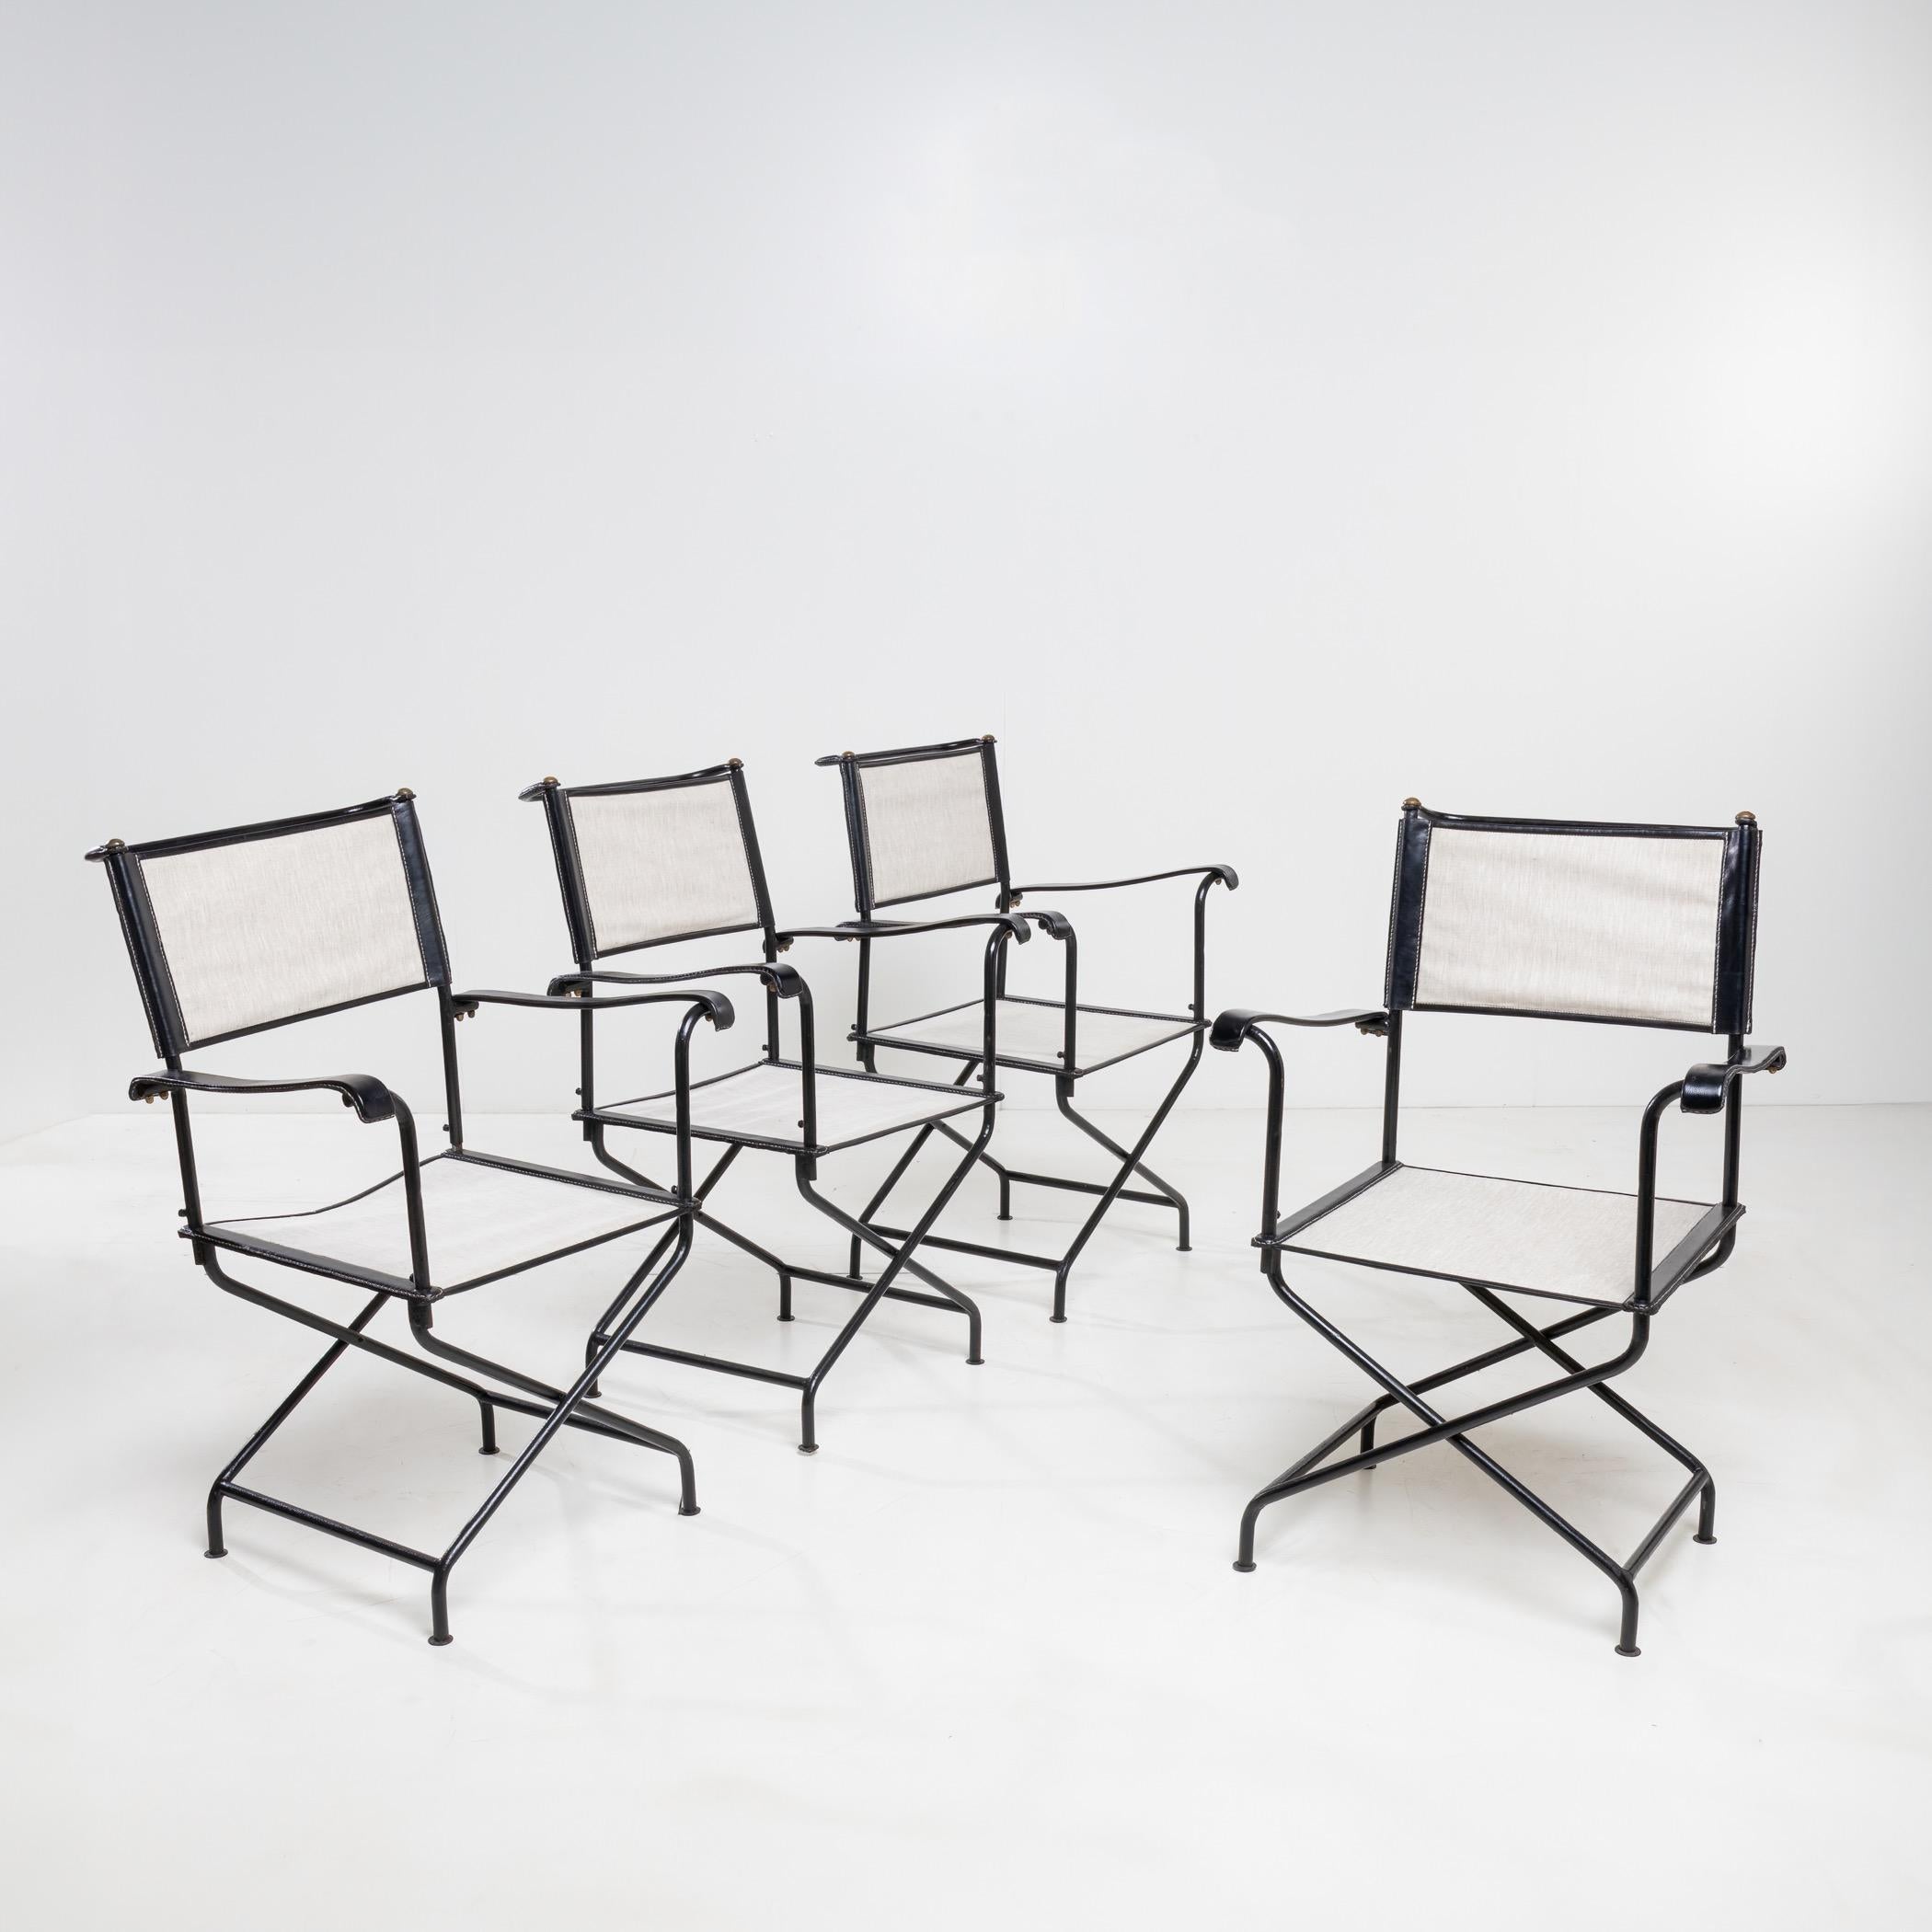 Set of four “director” armchairs, the structure and base in black forged steel by Jacques Adnet.
The seat and backrest in thick cotton with saddle stitched black leather accents.
The armrests and the large rear handle in saddle stitched black